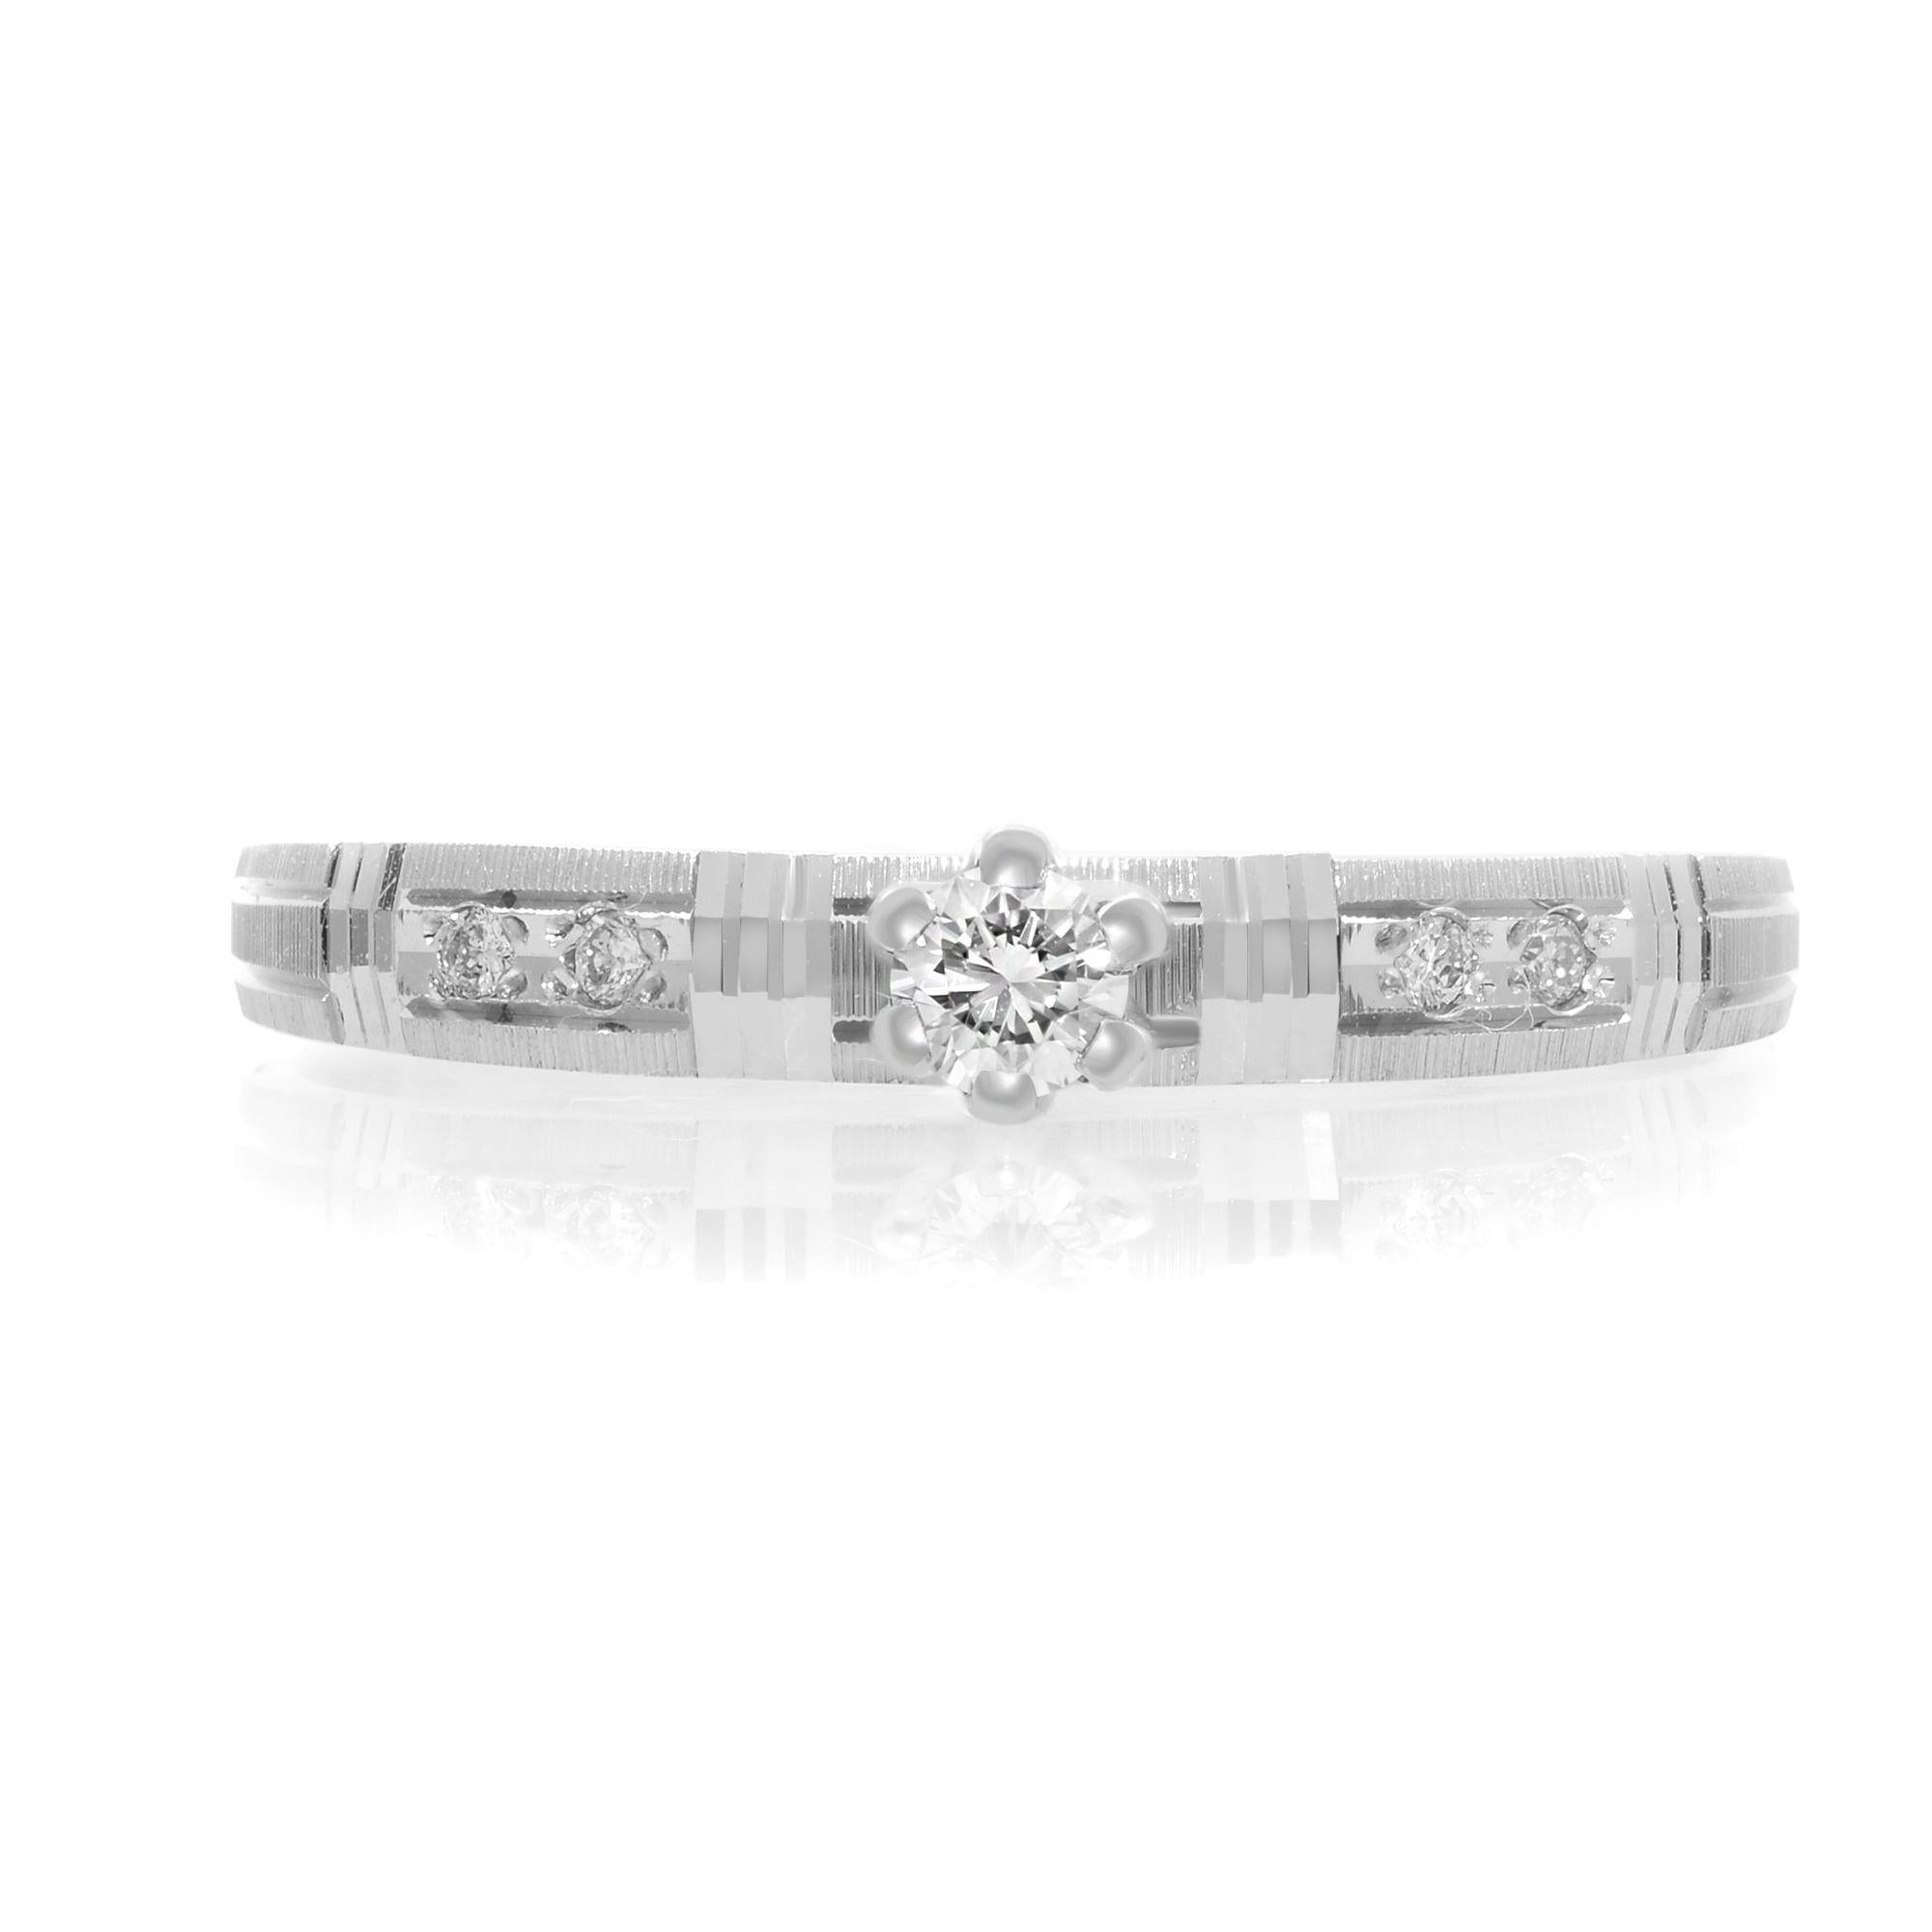 This simple engagement ring features a round cut 0.10 carat diamond solitaire, showing brilliance and a unique sophistication. The shank is embellished with channel-set tiny diamond accents to add more beauty. It is crafted in 14k white gold. Total